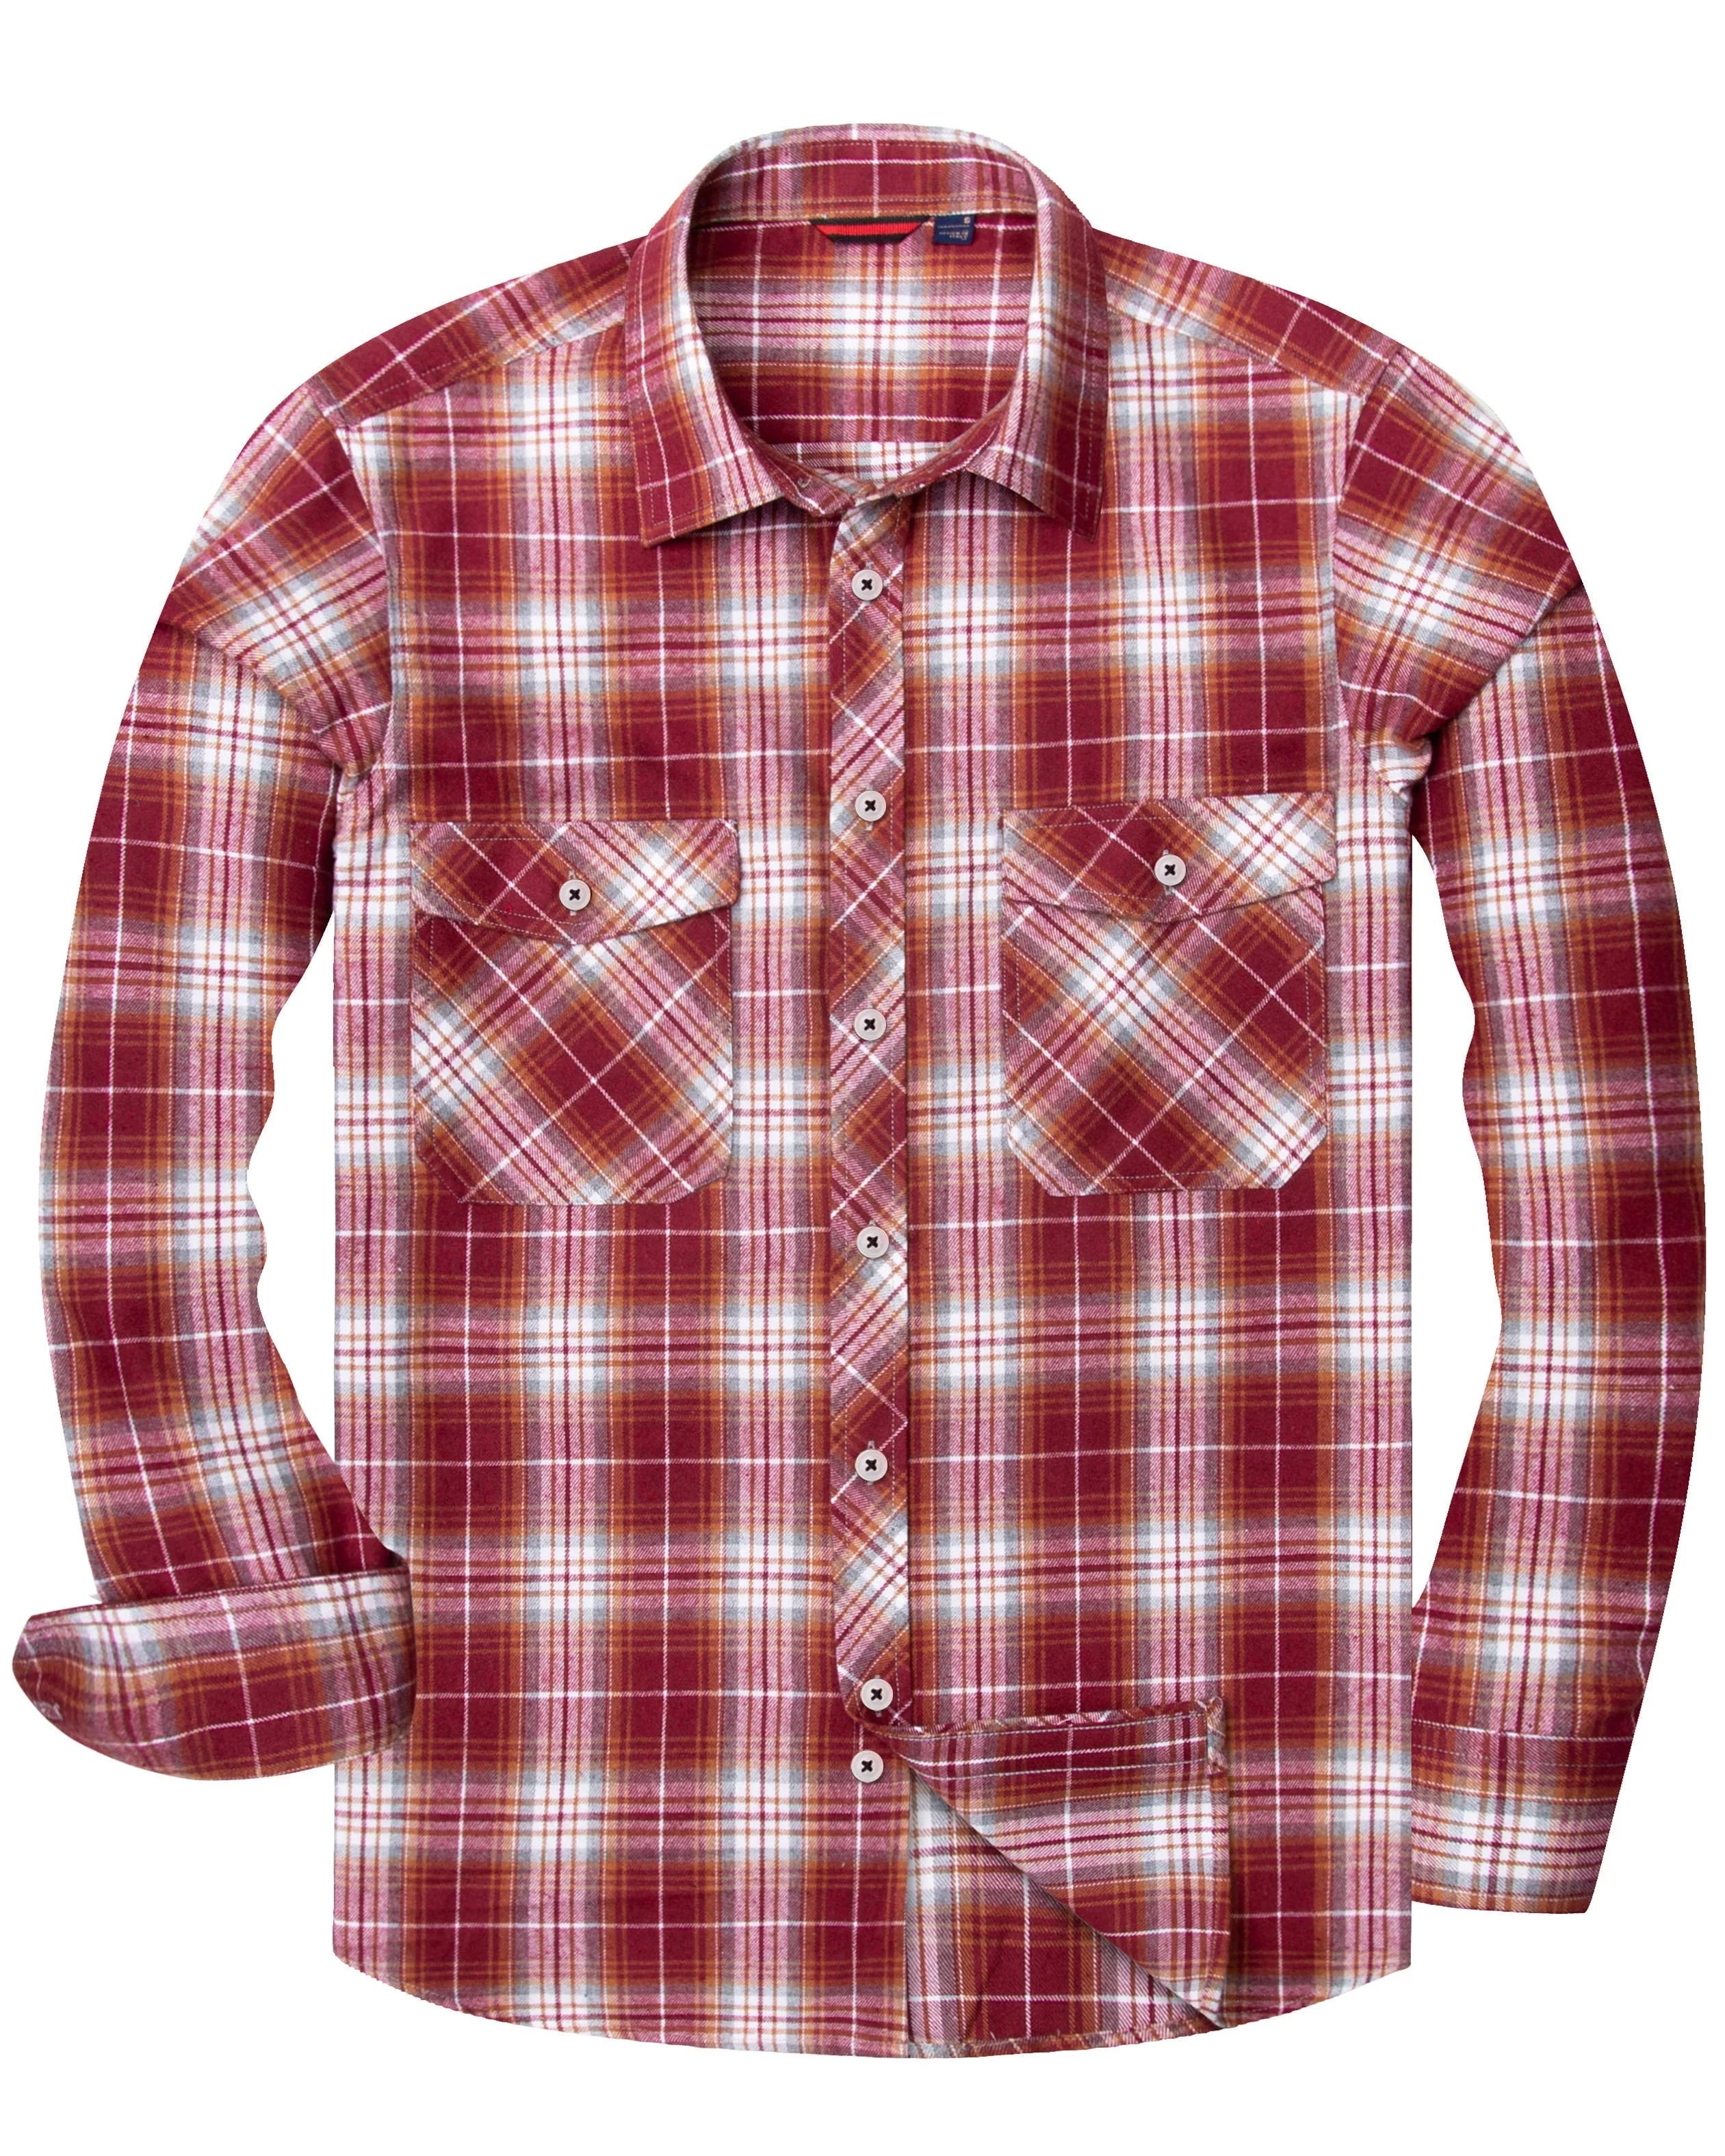 Alimens & Gentle Red Plaid Flannel Shirts for Men Long Sleeve Casual Button Down Shirt | Walmart (US)